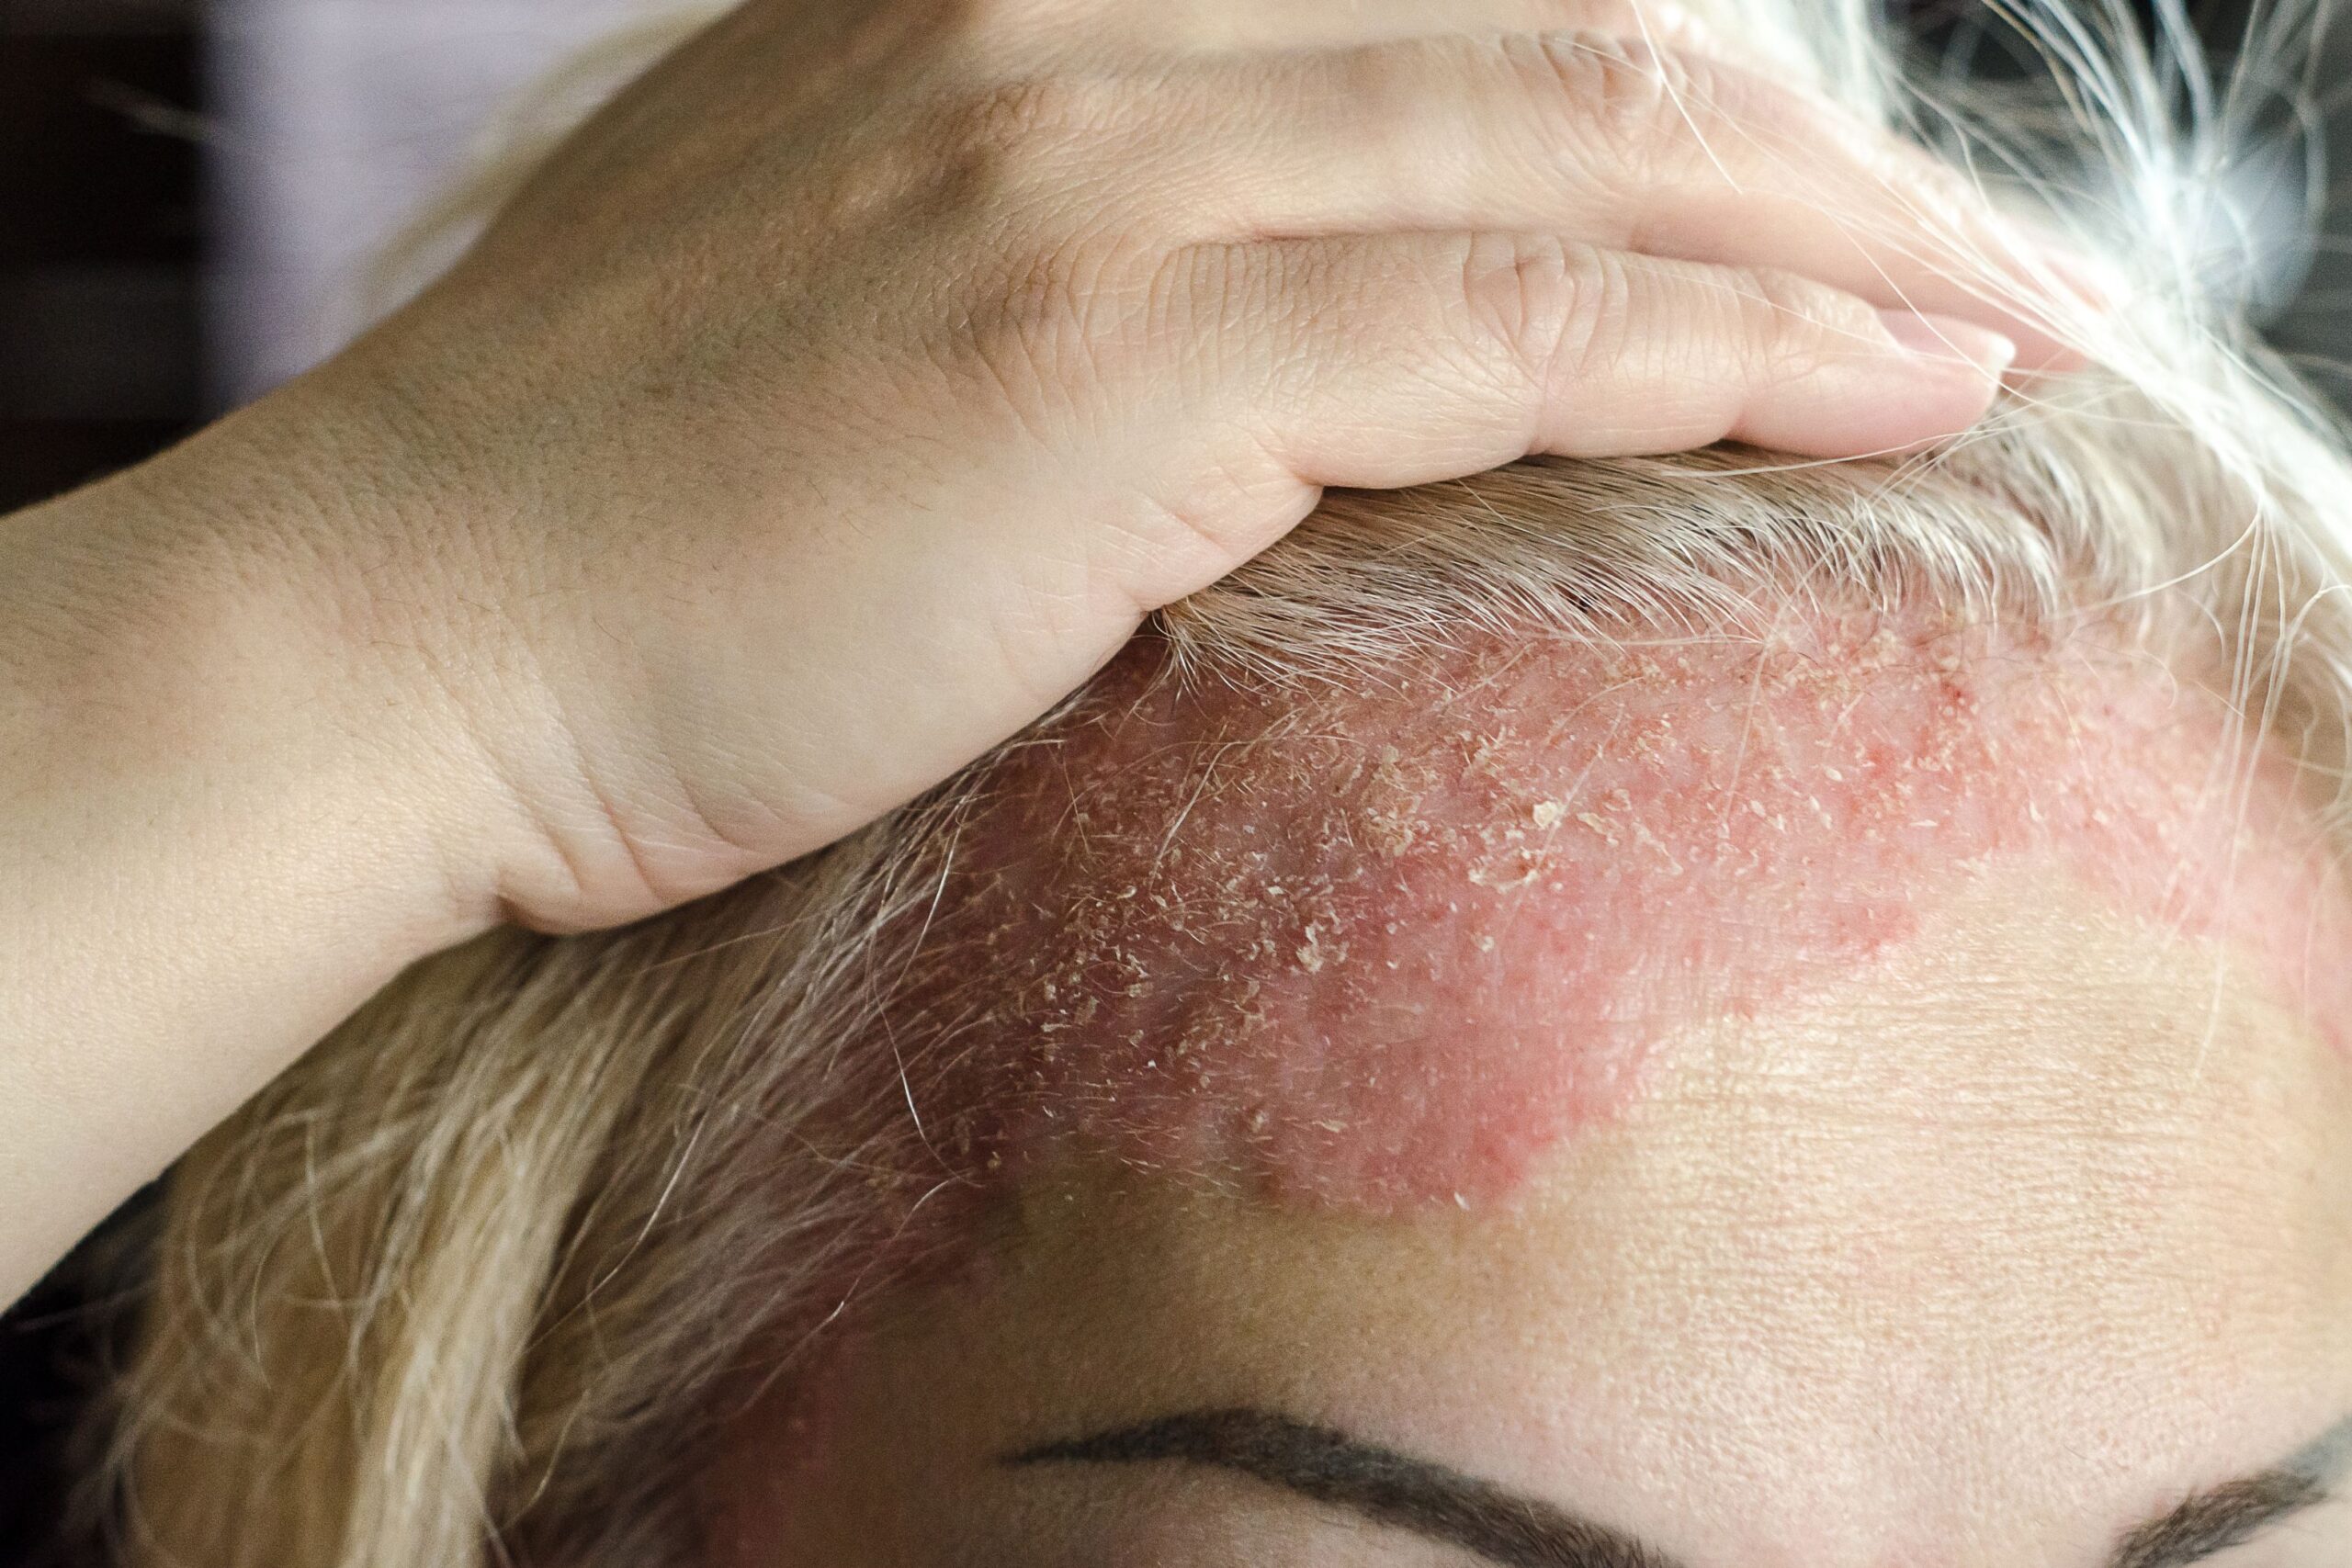 Psoriasis treatments at Freyja Medical in Wrexham, Nantwich and Cheshire